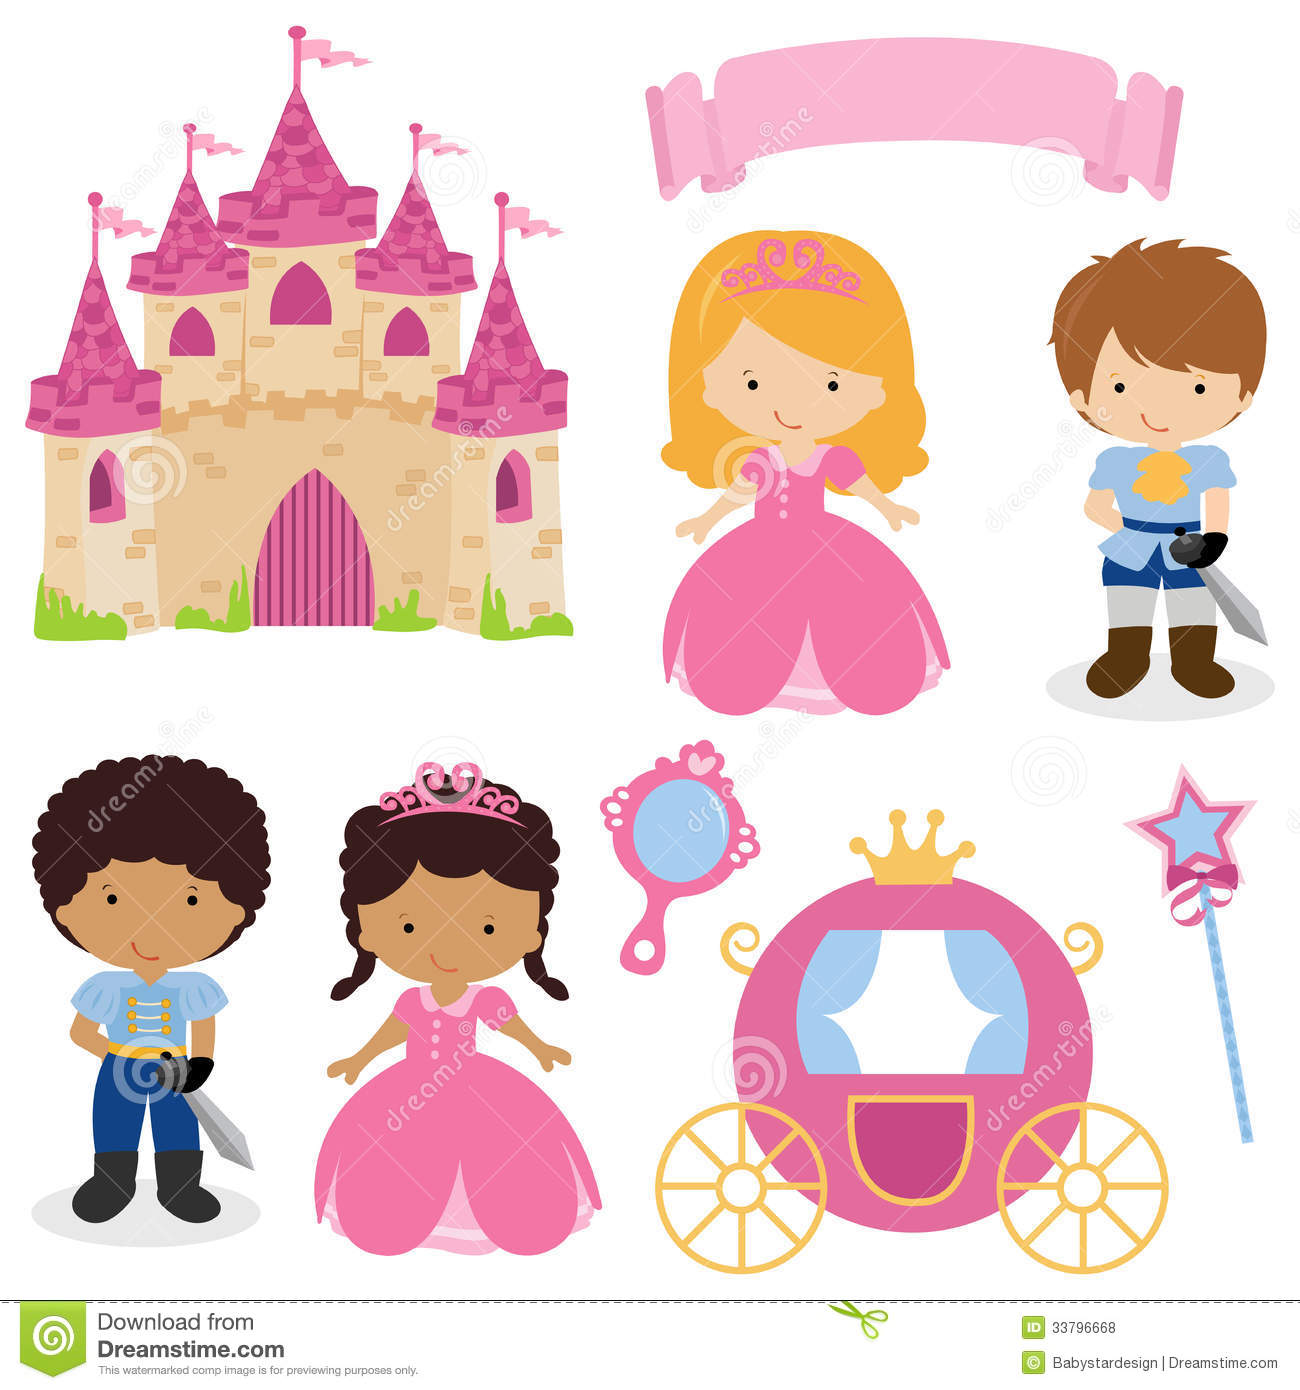 Cute Princess And Prince Fairy Tale Royalty Free Stock Photos   Image